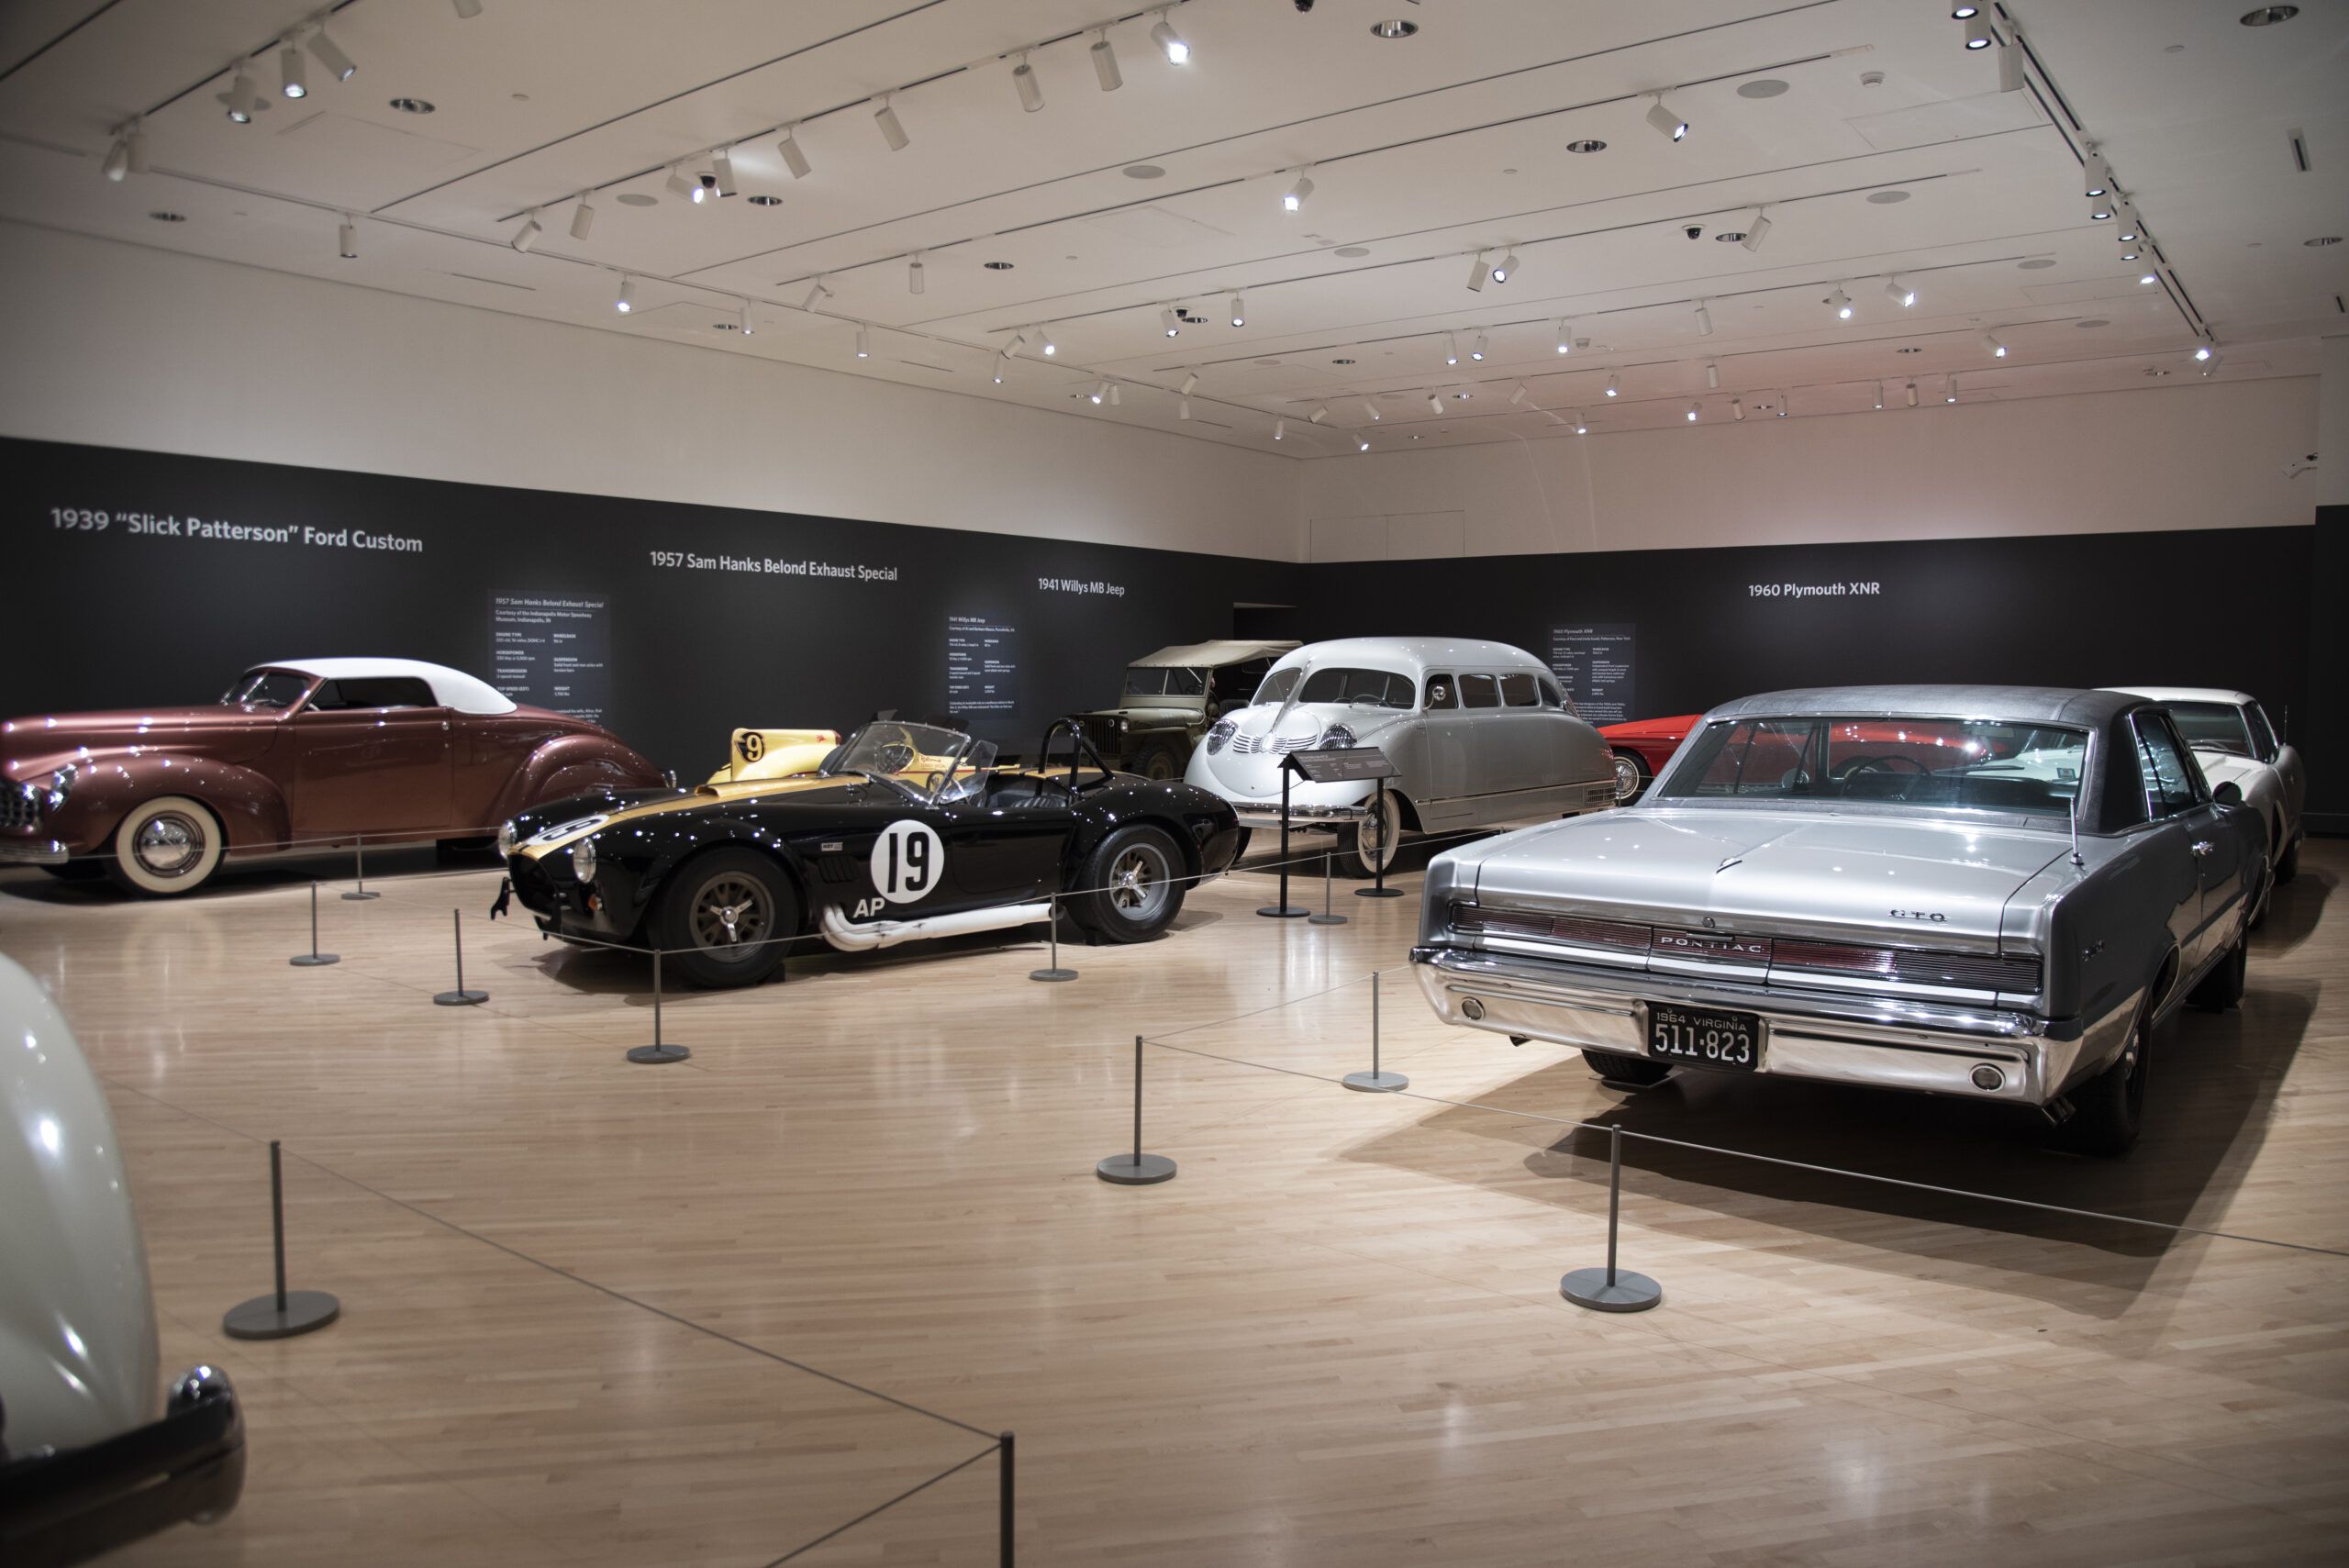 DRIVE! Iconic American Cars and Motorcycles